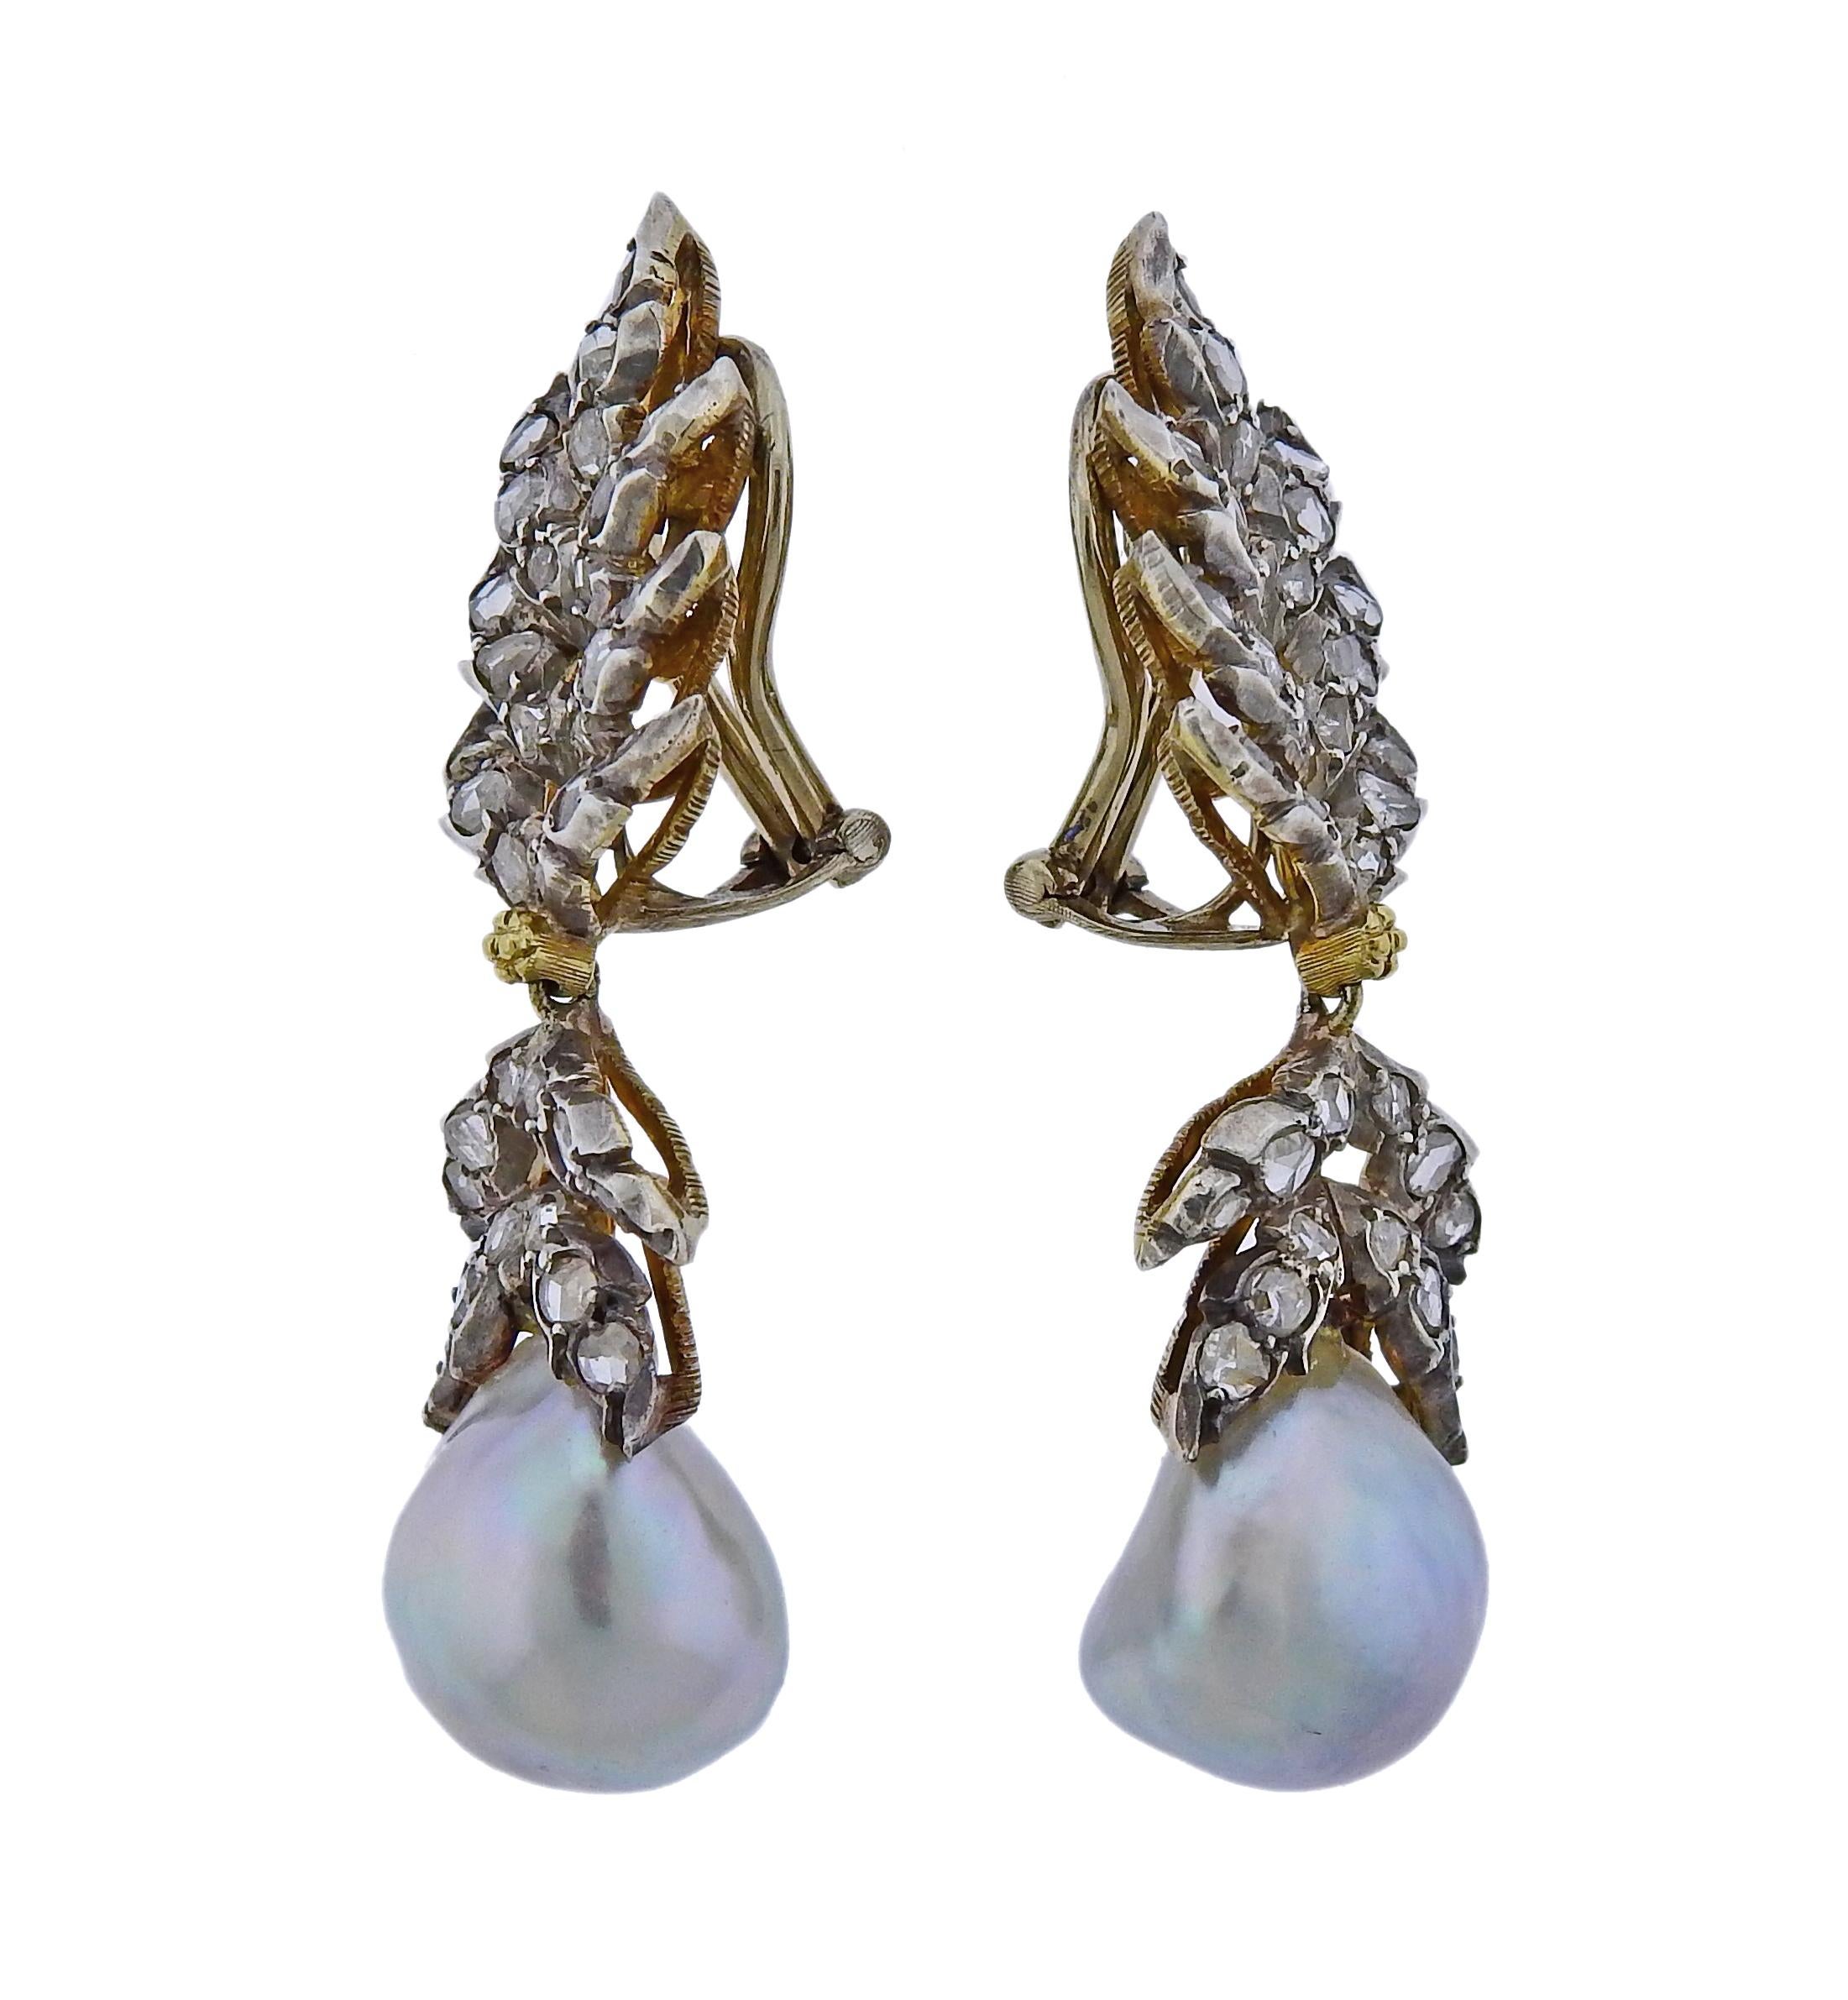 Pair of 18k yellow gold and silver top earrings by Buccellati, featuring rose cut diamonds and 14mm x 12mm pearls. Earrings are 45mm x 13mm and weigh 12.7 grams. Marked Buccellati Italy, 18k.
